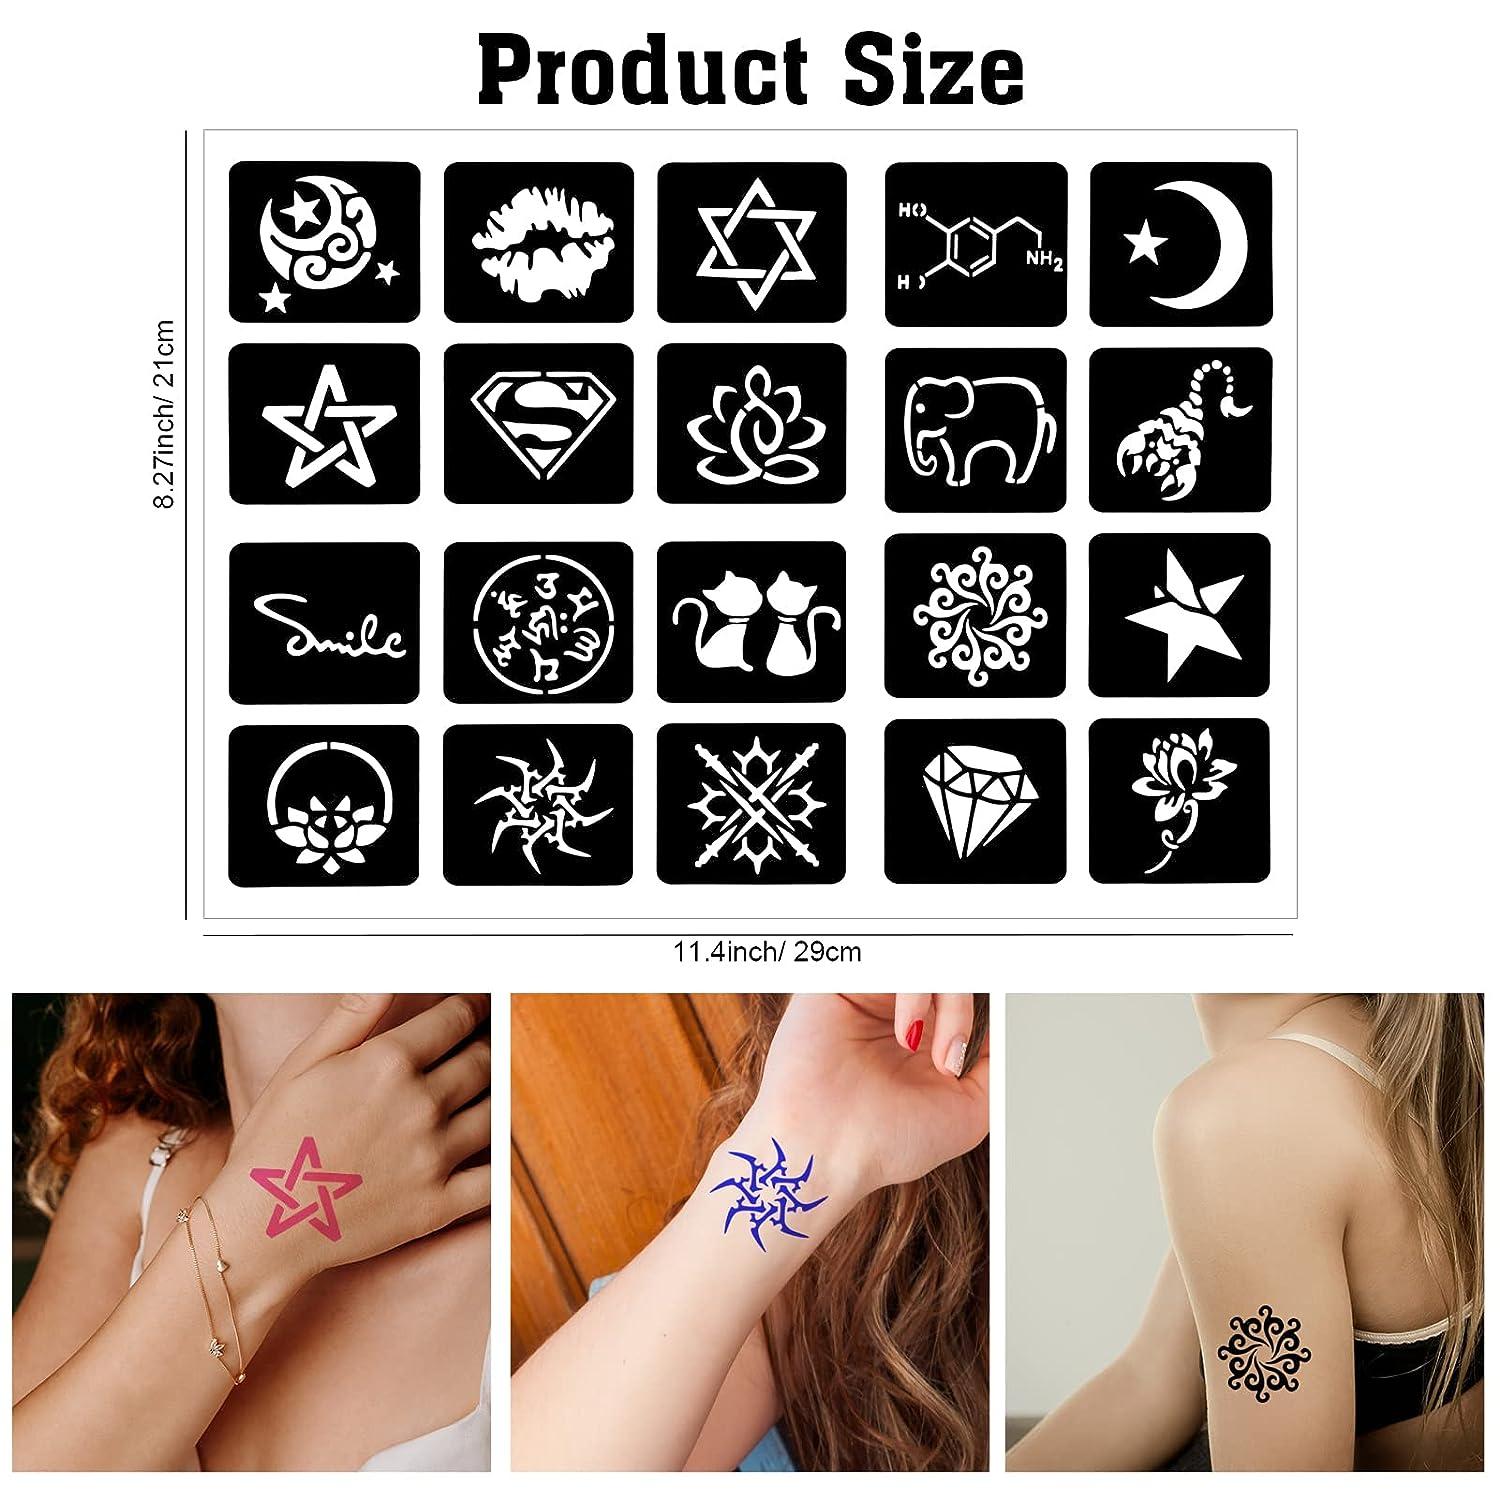 Qpout Tattoo Stencils For Kids Adults 16 Sheets Henna Tattoo Stencil Kit  Small and Big Tattoo Stencils Designs Tattoo Stencils for Real Tattoos  Skeleton Spider Owl Flower Butterfly Tribal Totem